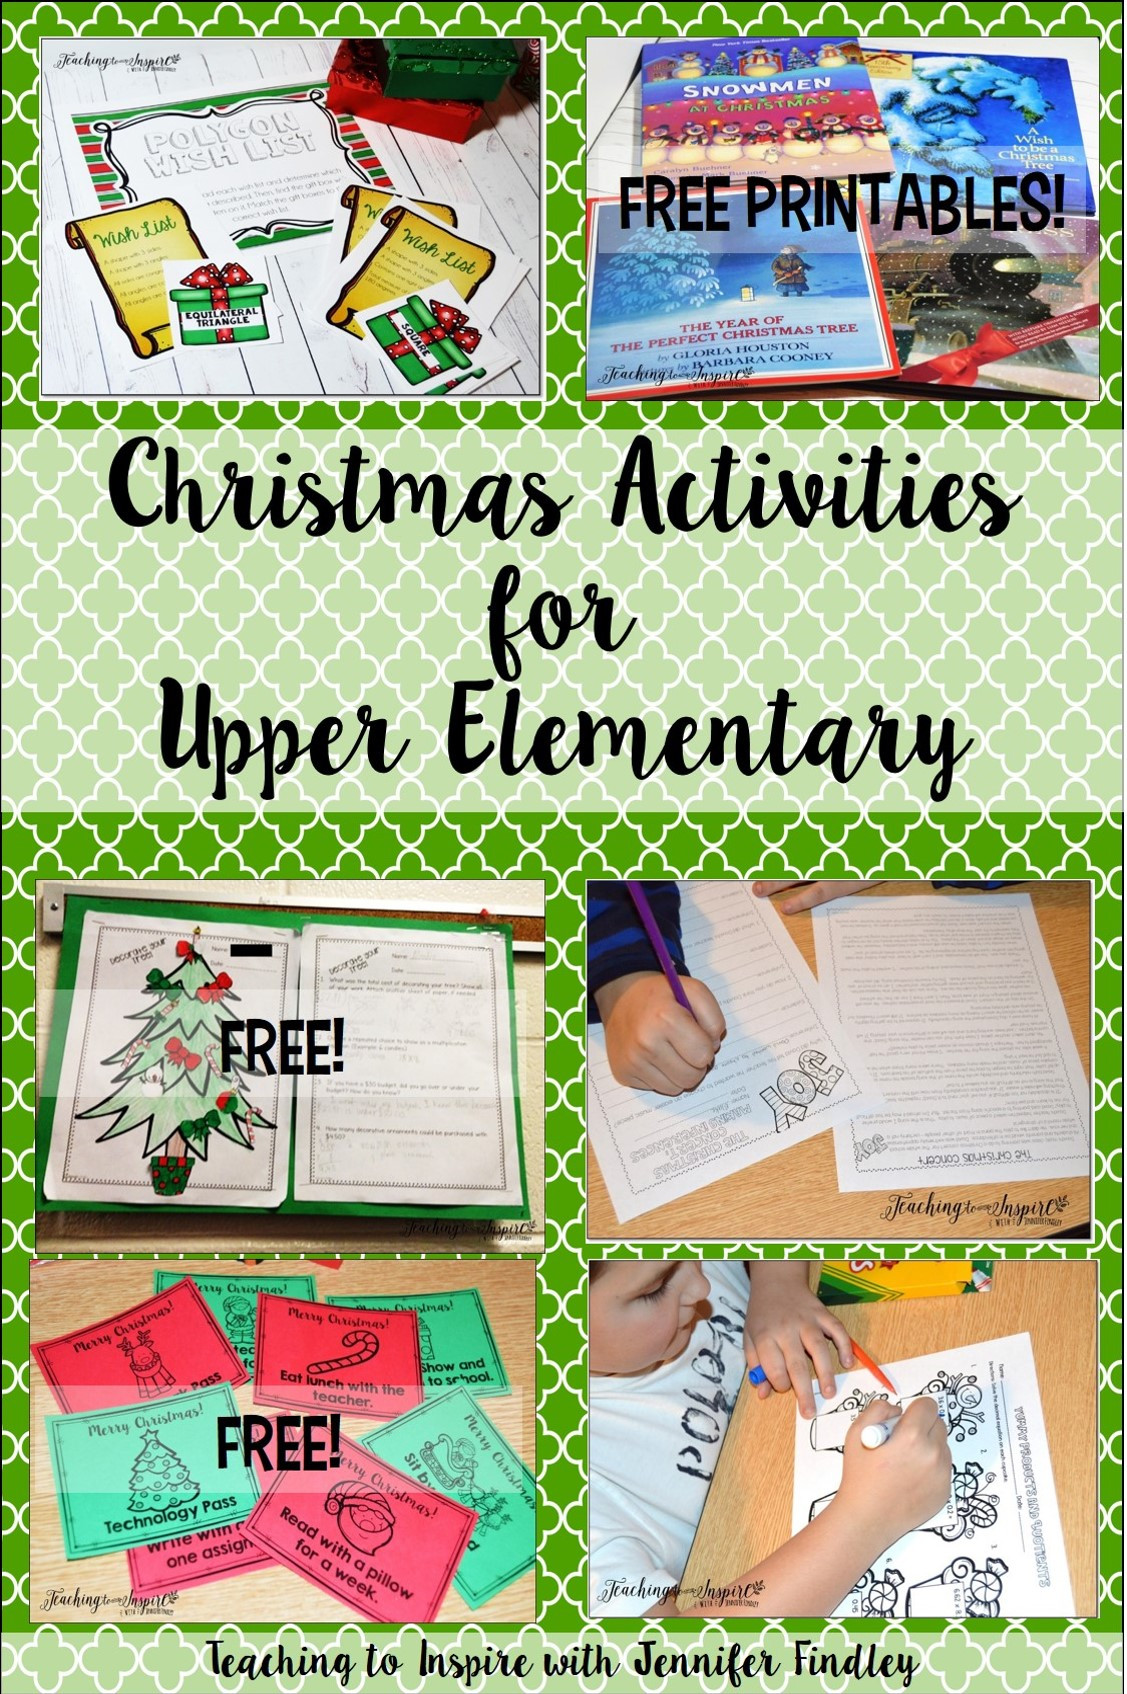 6Th Grade Christmas Party Ideas
 Christmas Activities for Upper Elementary Teaching to